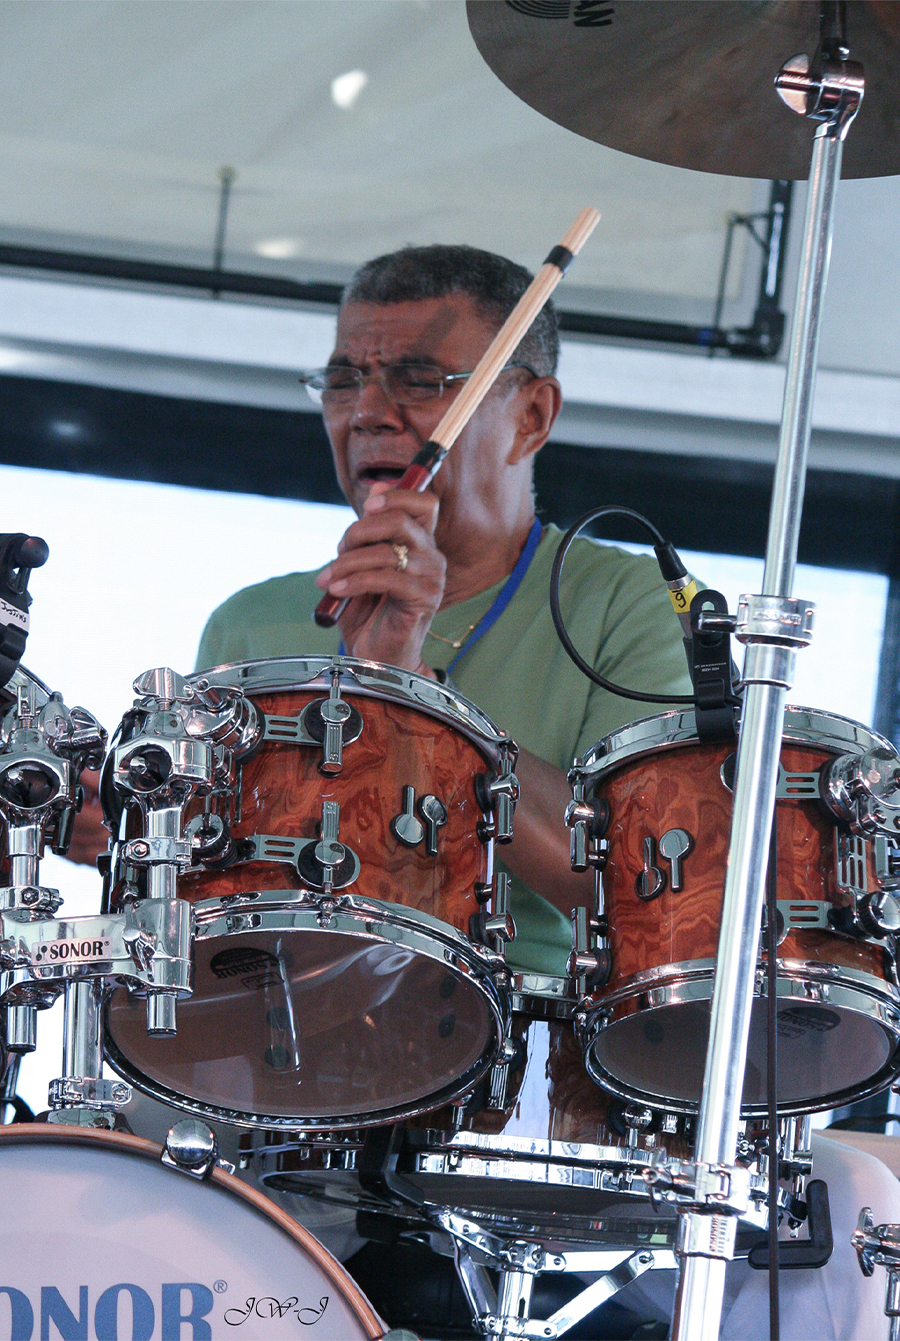 A behind the kit image of Jack DeJohnette playing at the Newport Jazz Festival in 2012